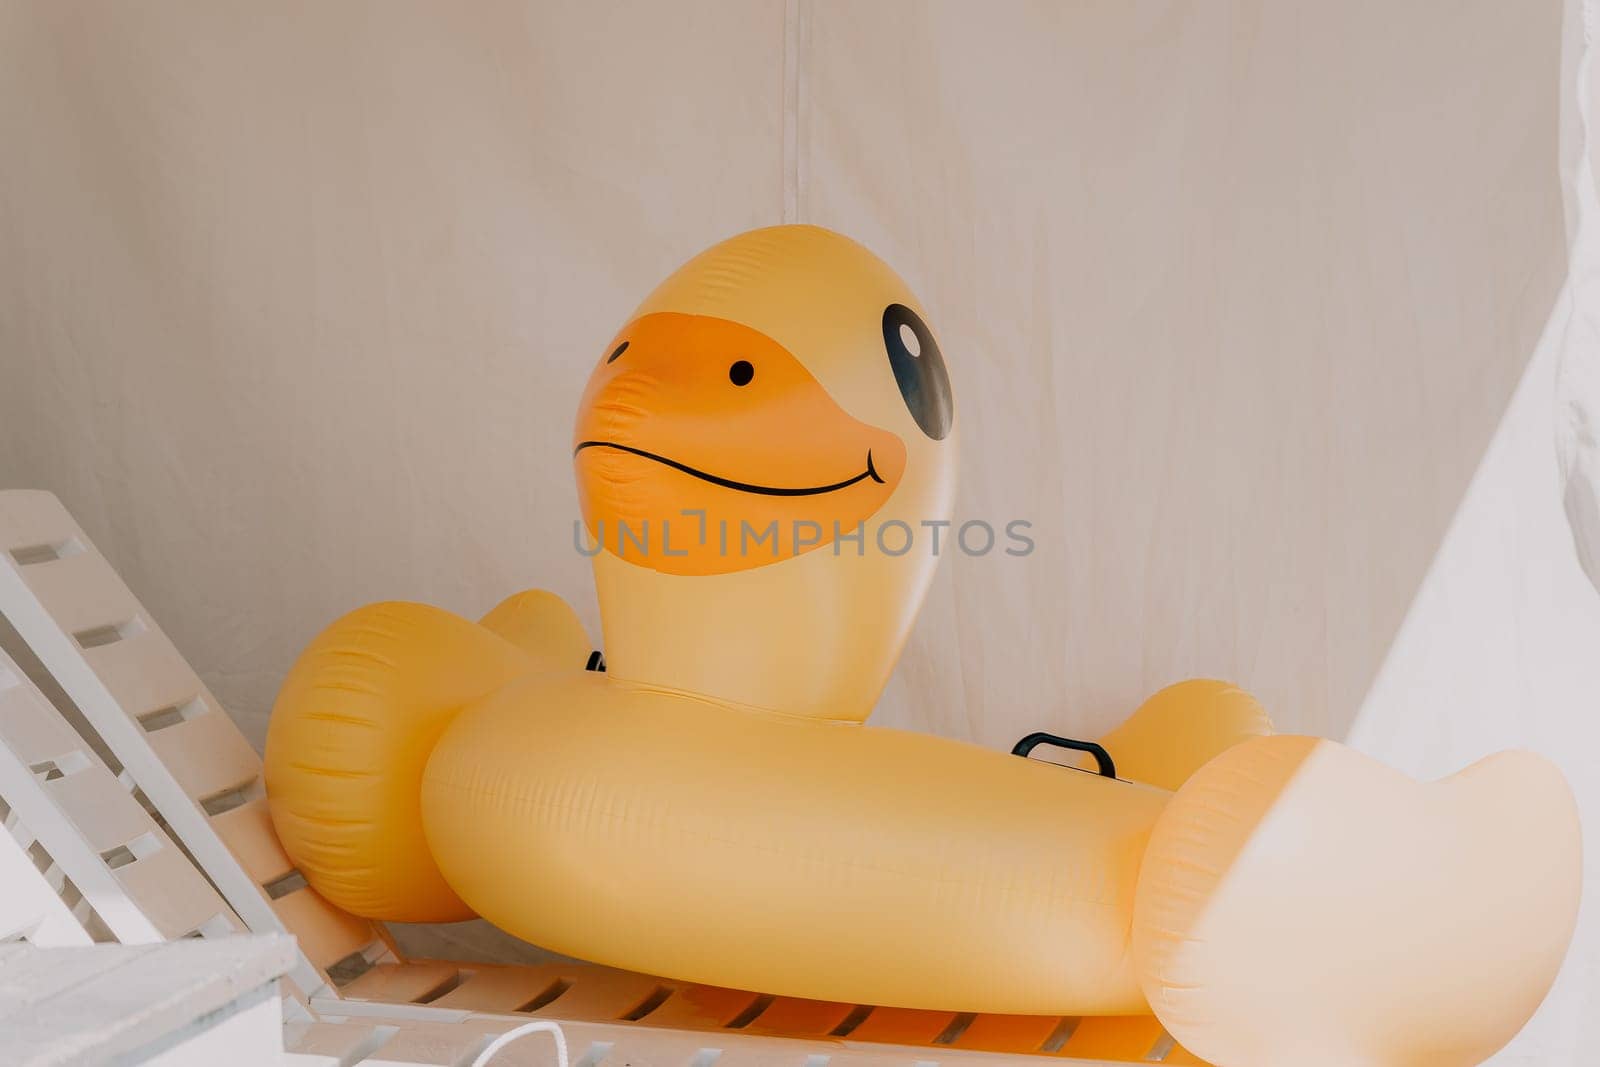 Inflatable duckling, pool, summer - Bright yellow floatation device enhances swimming experience for children during warm days.